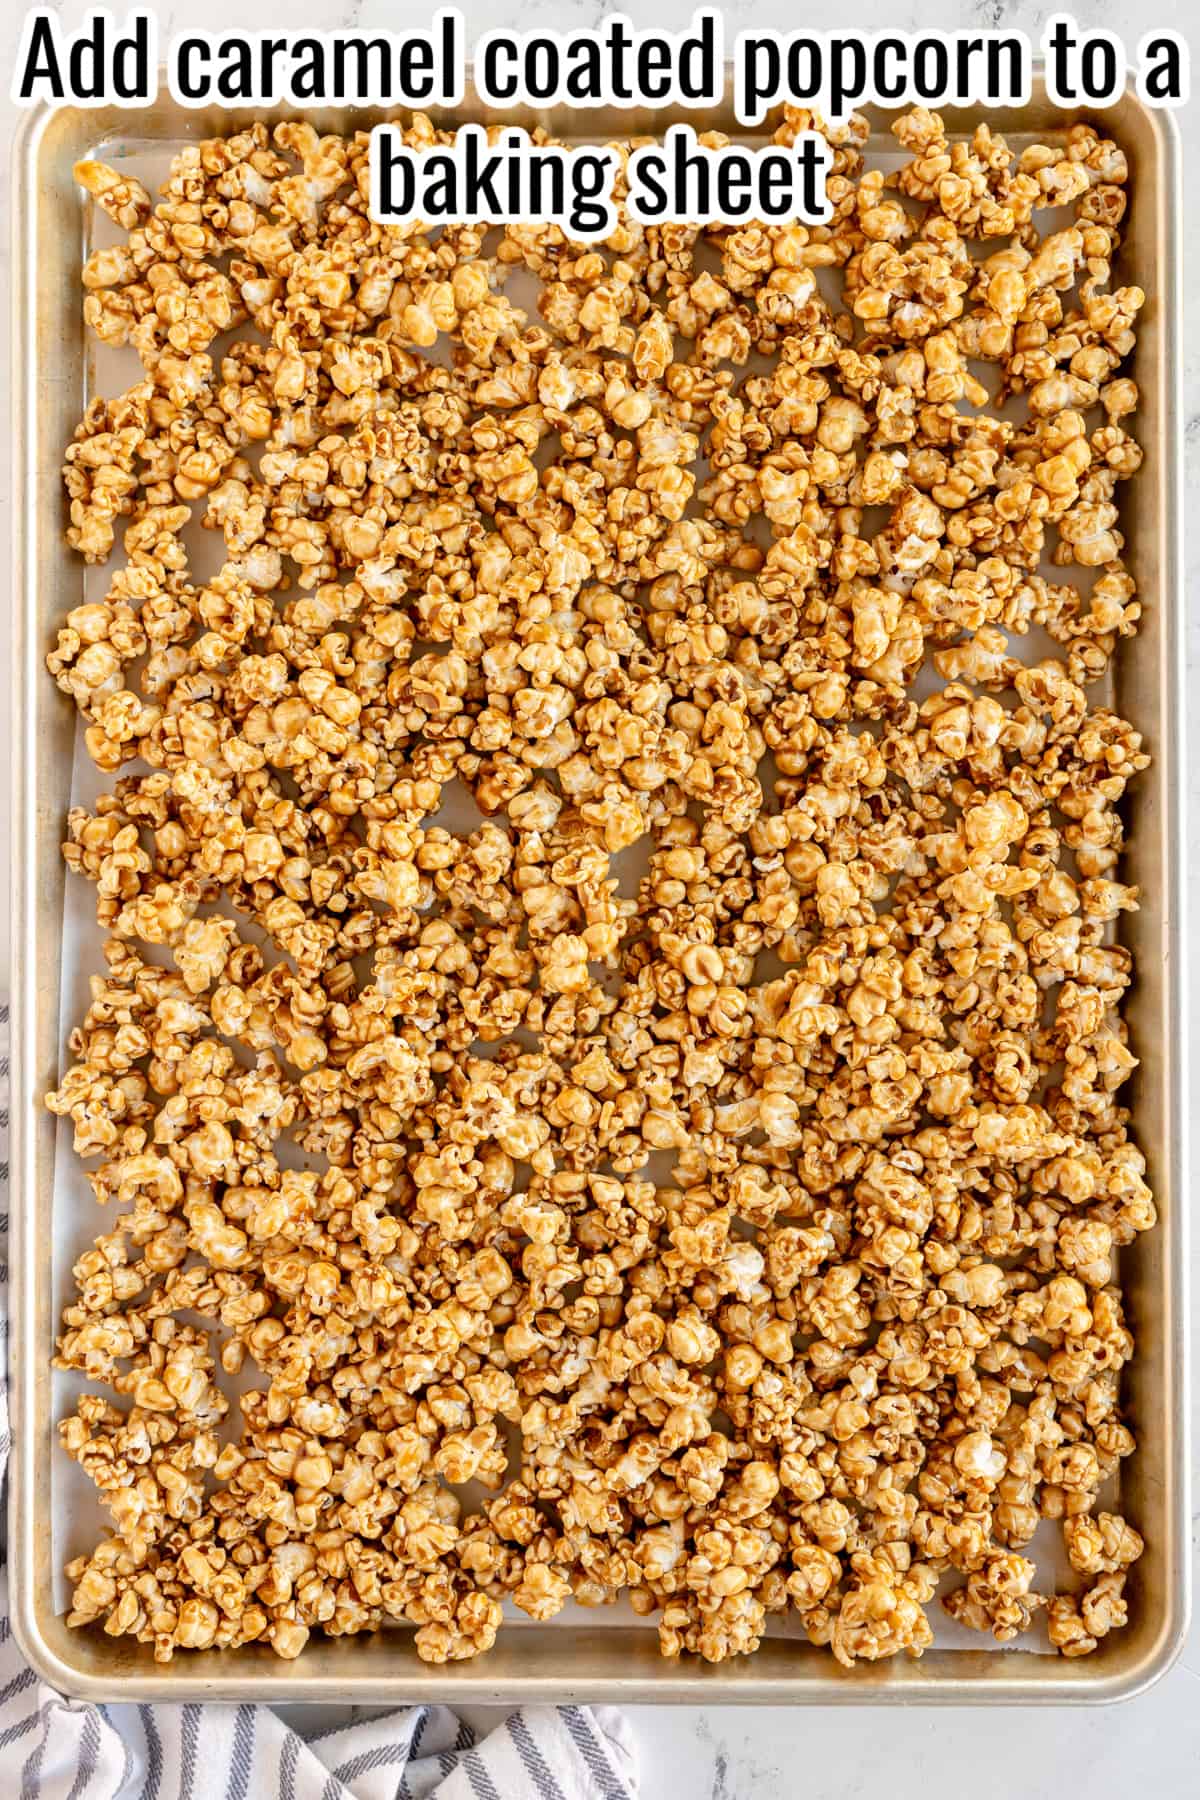 caramel corn spread out on baking sheet, before baking